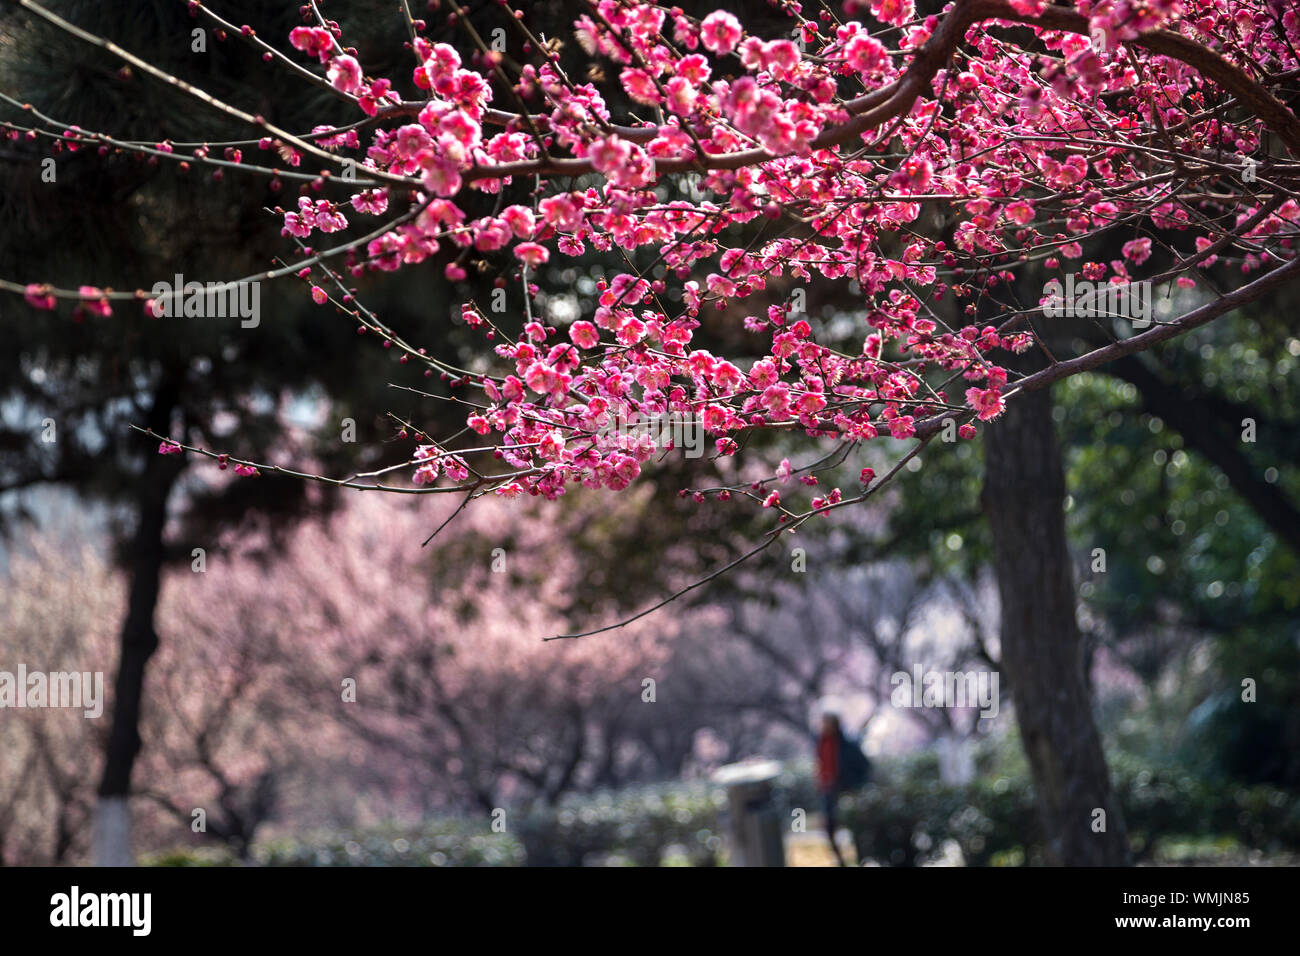 Close-up High Section Of Flower Tree Against Blurred Background Stock Photo  - Alamy